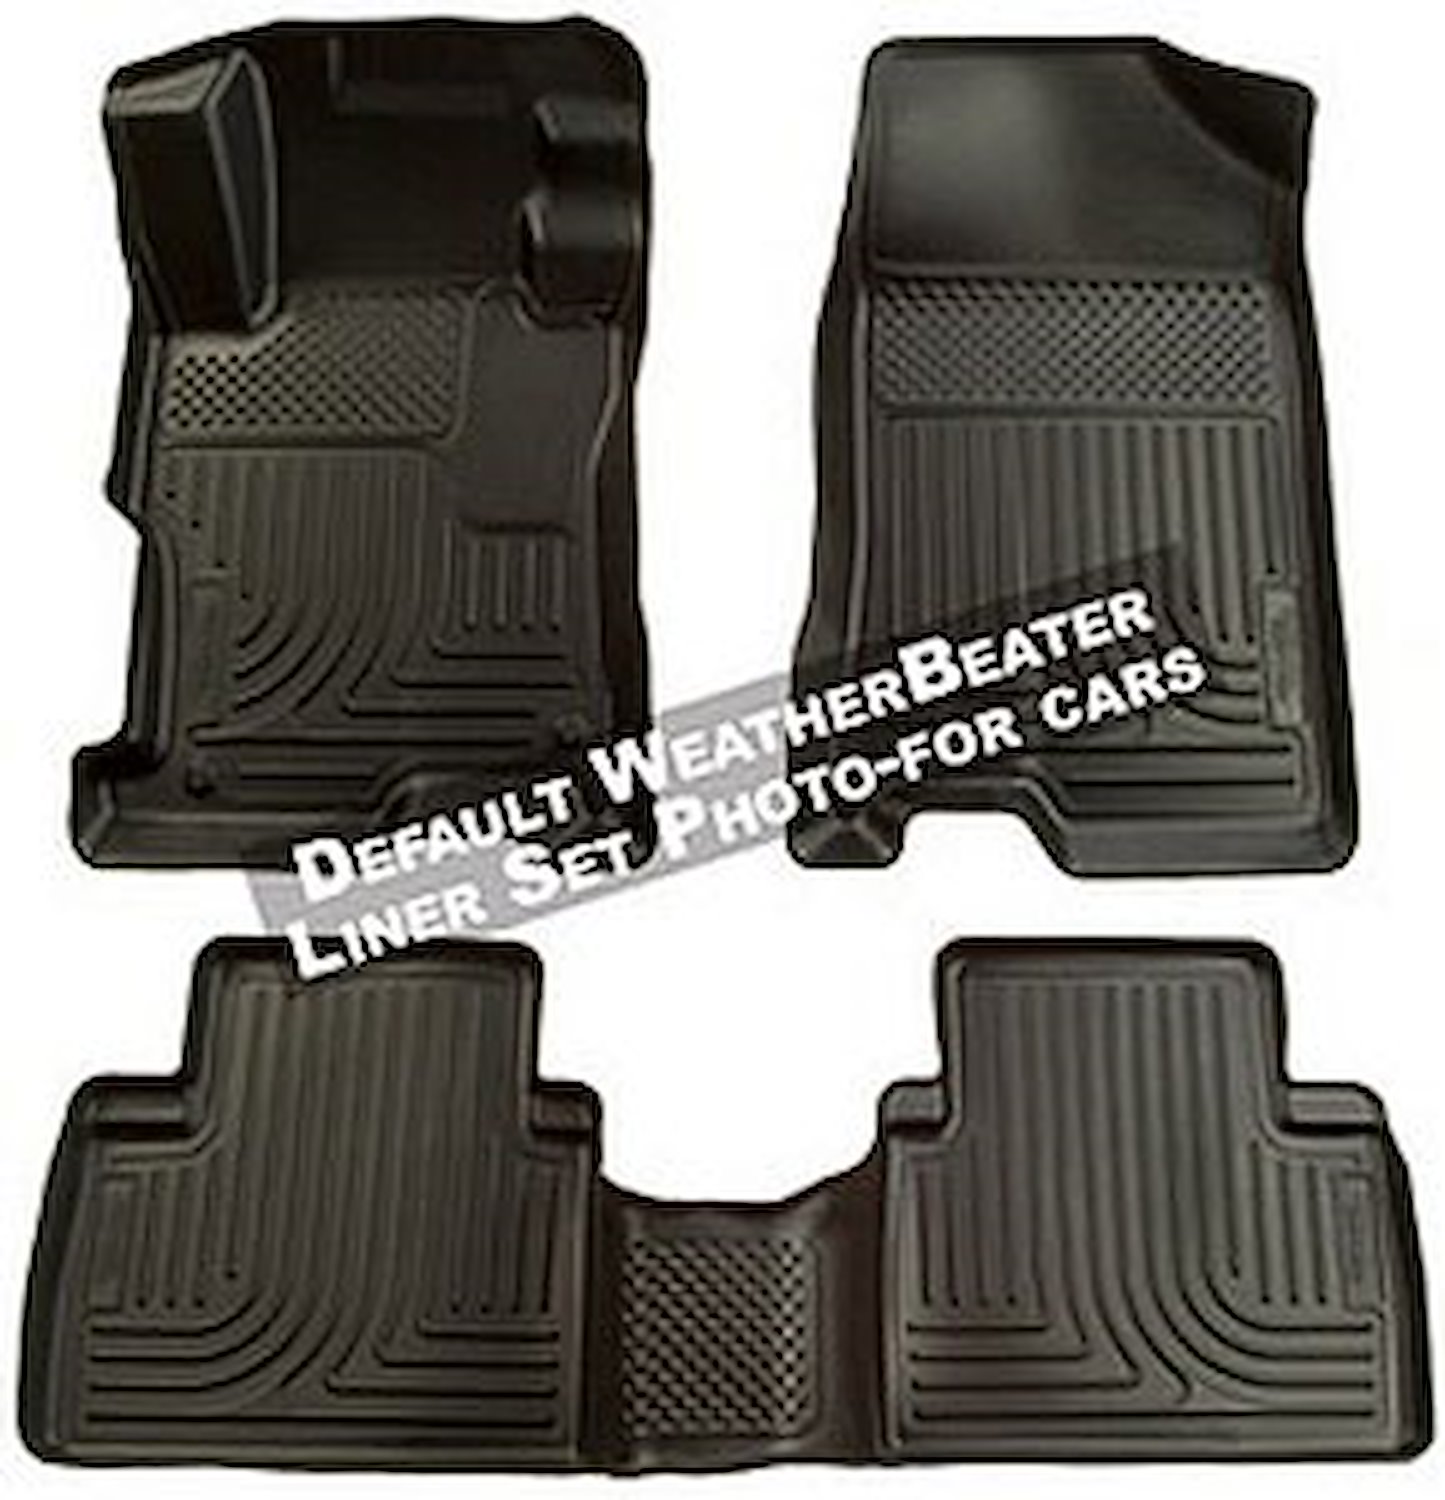 Husky Liners 98701 Weather Beater Floor Mats 2010 2015 Ford